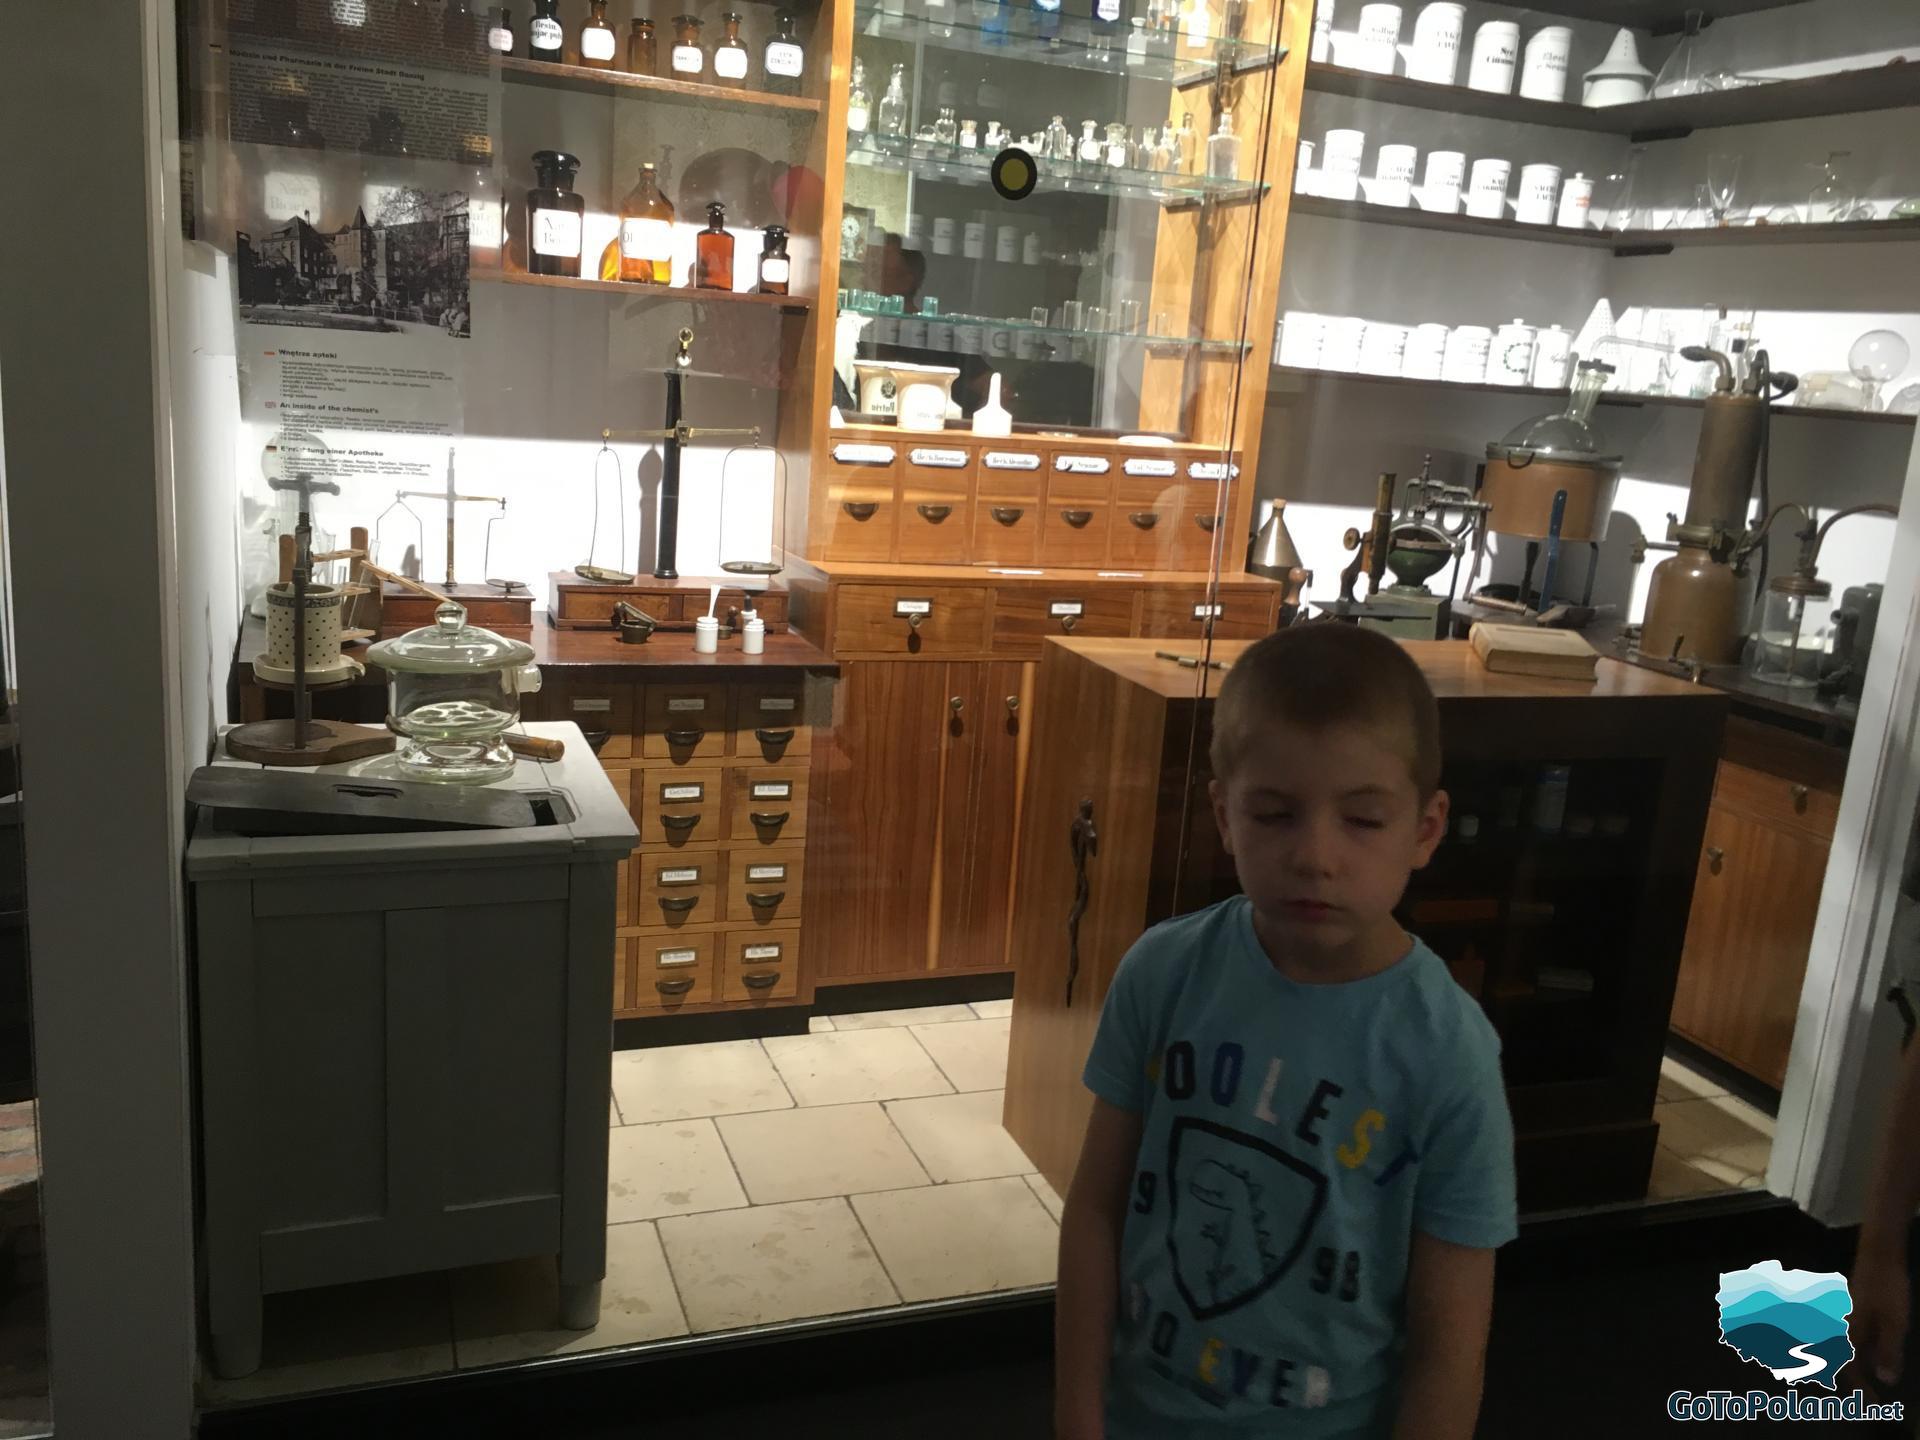 the exhibition shows an old pharmacy with many cabinets, glass containers and various utensils